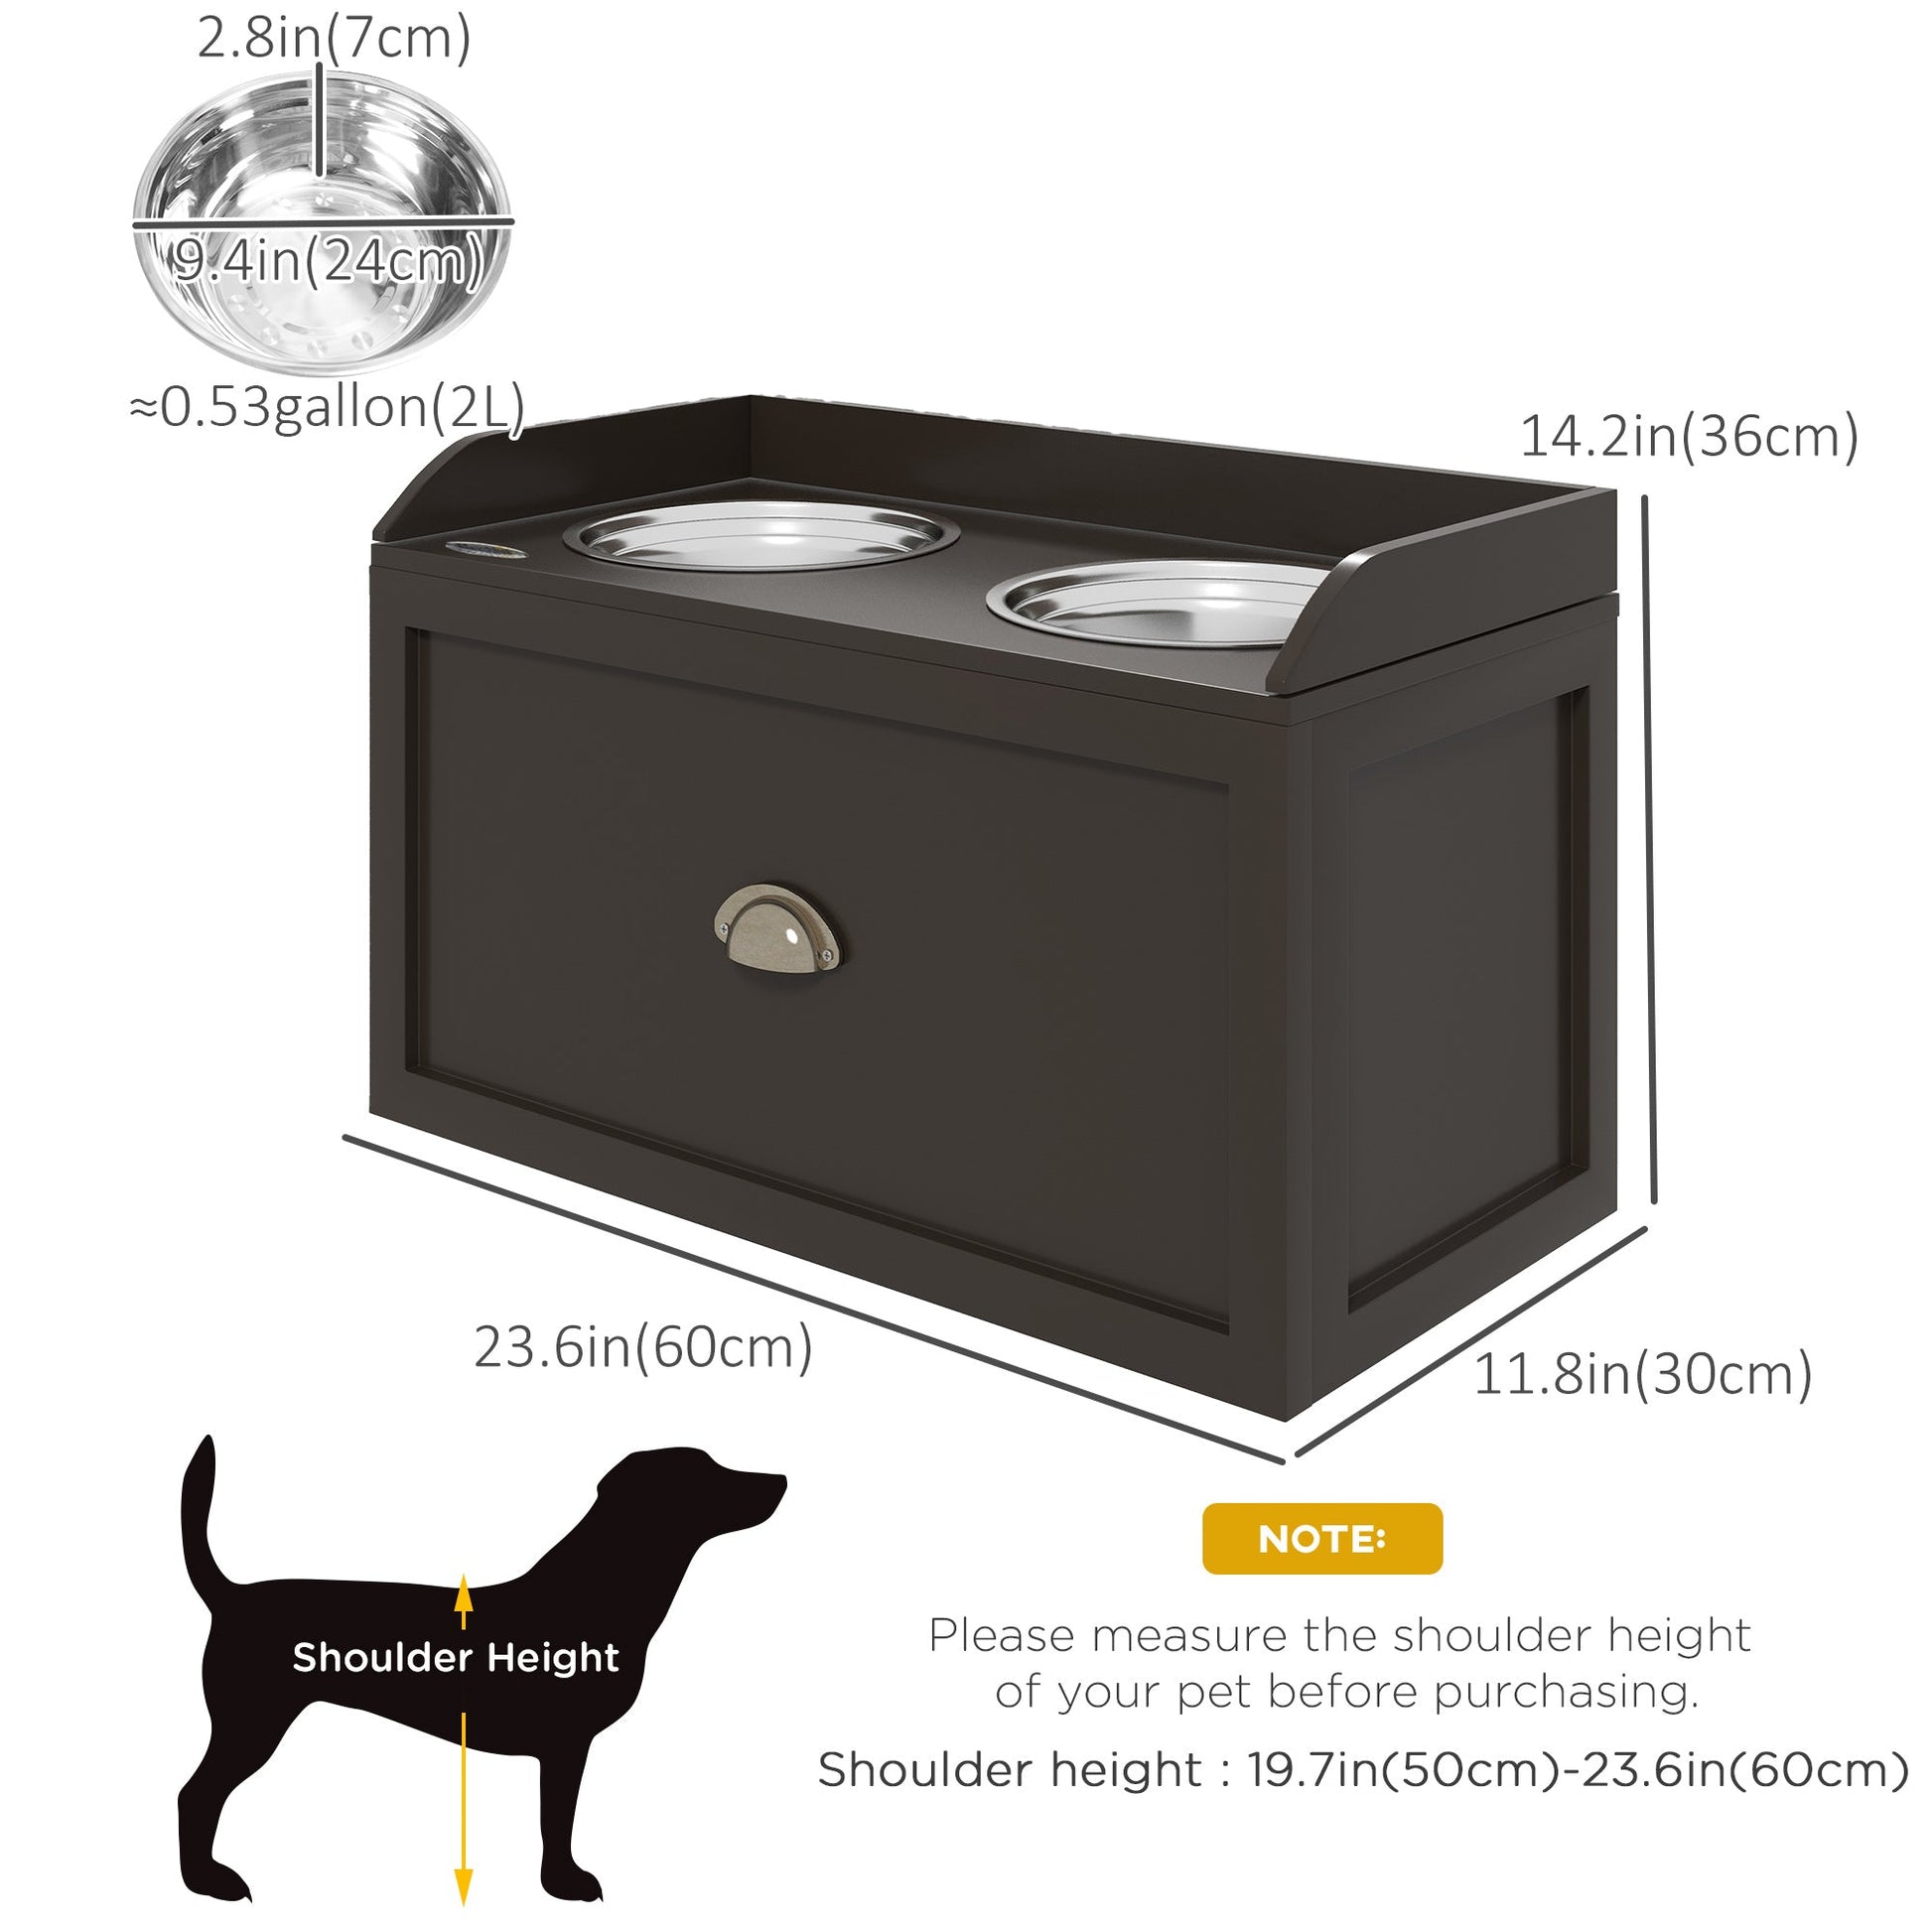 Large Elevated Dog Bowls with Storage Drawer, Raised Pet Feeding Station with 2 Stainless Steel Bowls, Brown at Gallery Canada